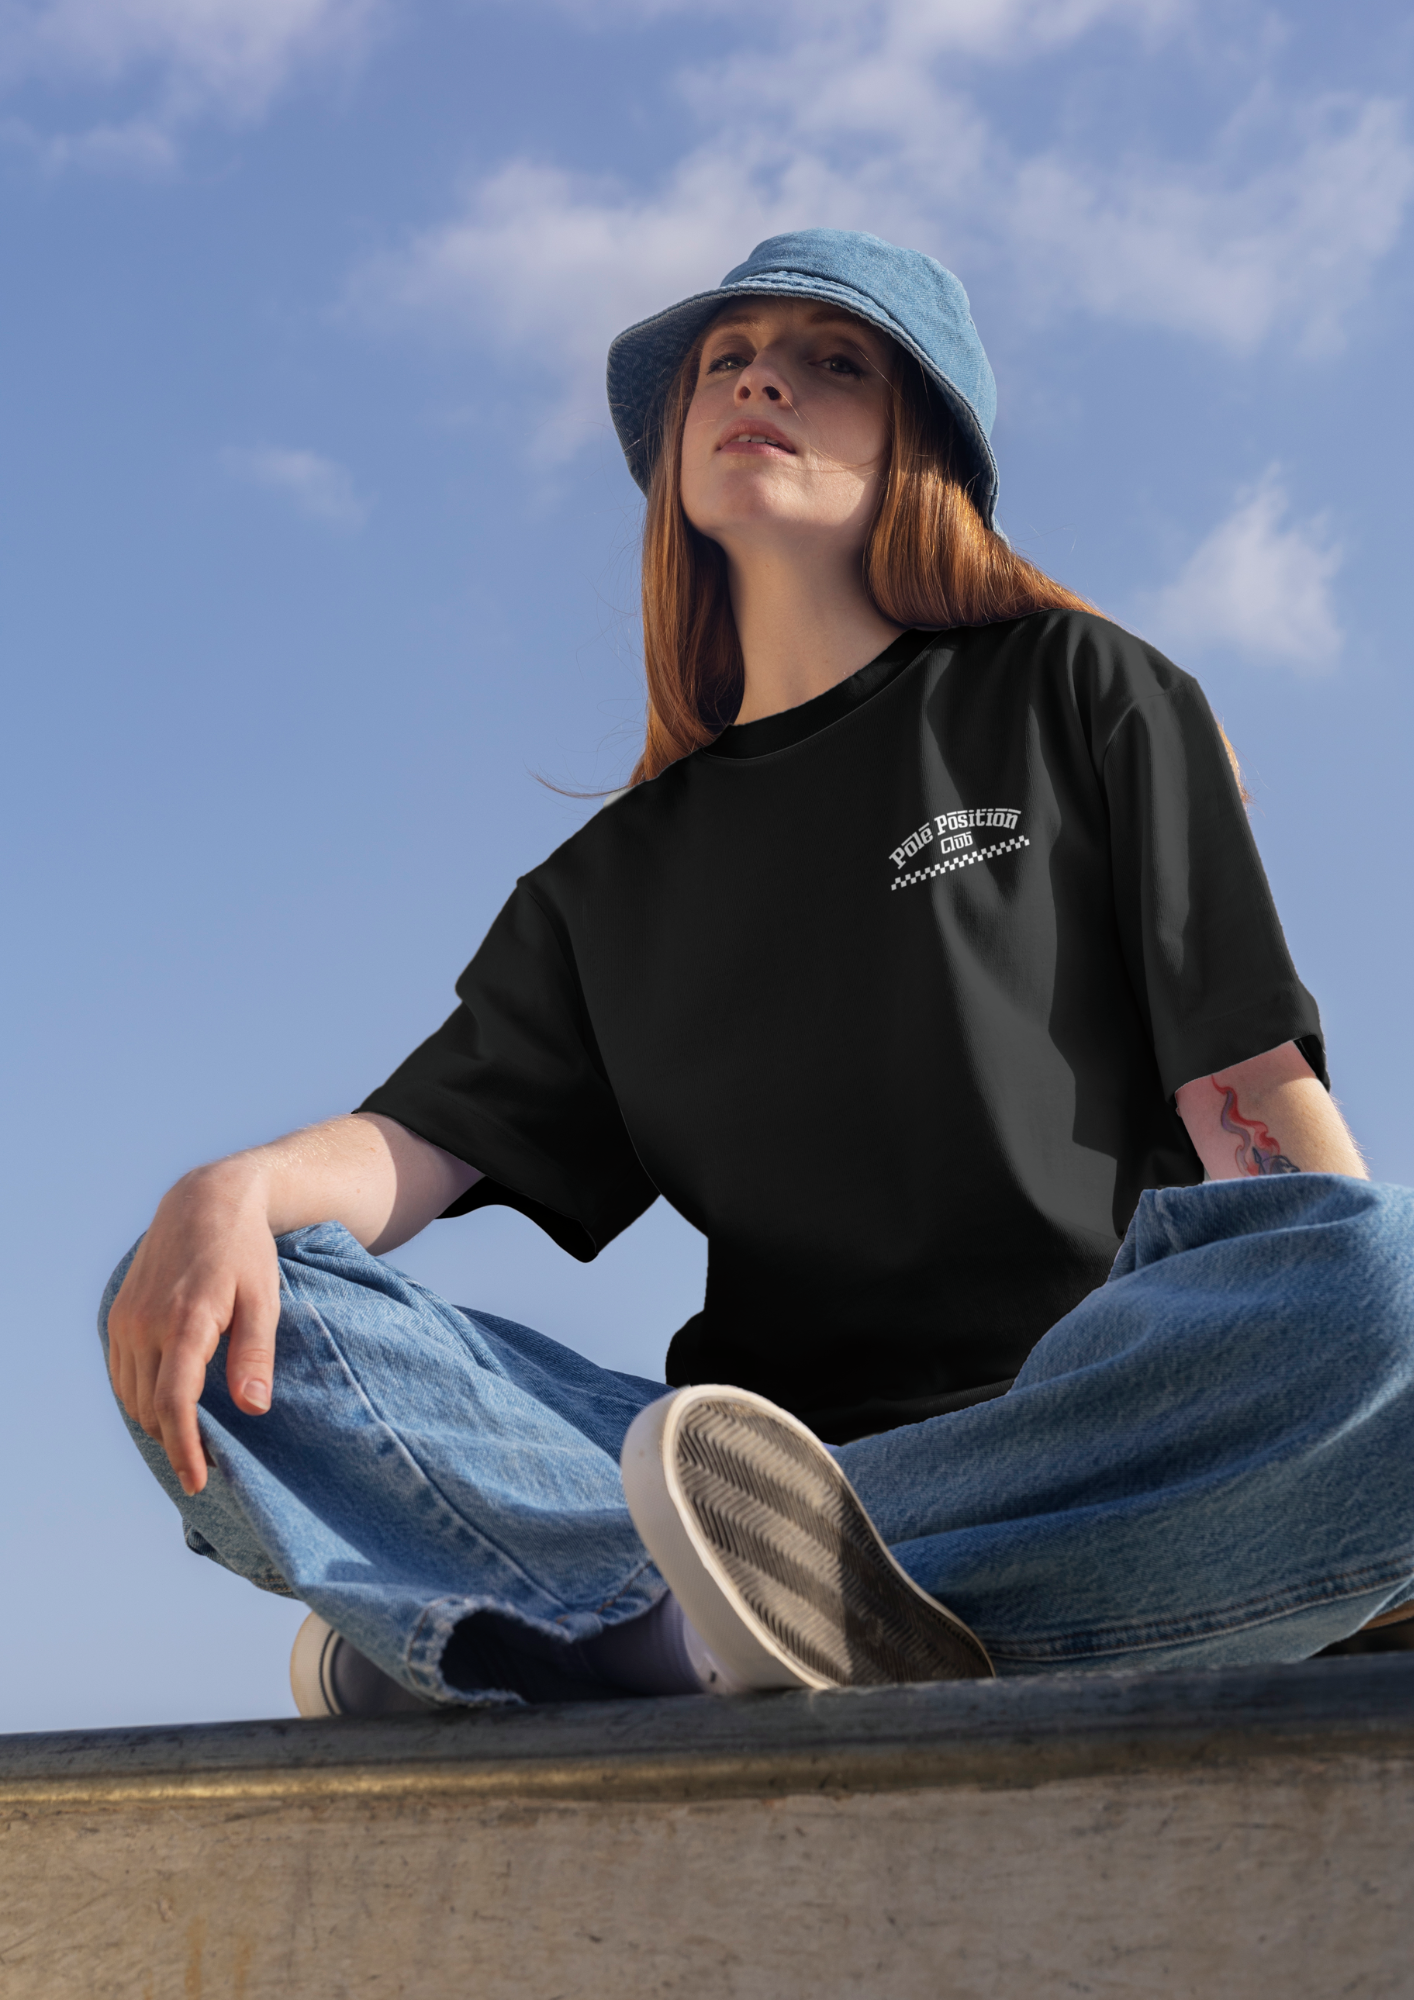 Pole Position Club - Model with black shirt racing motorsport